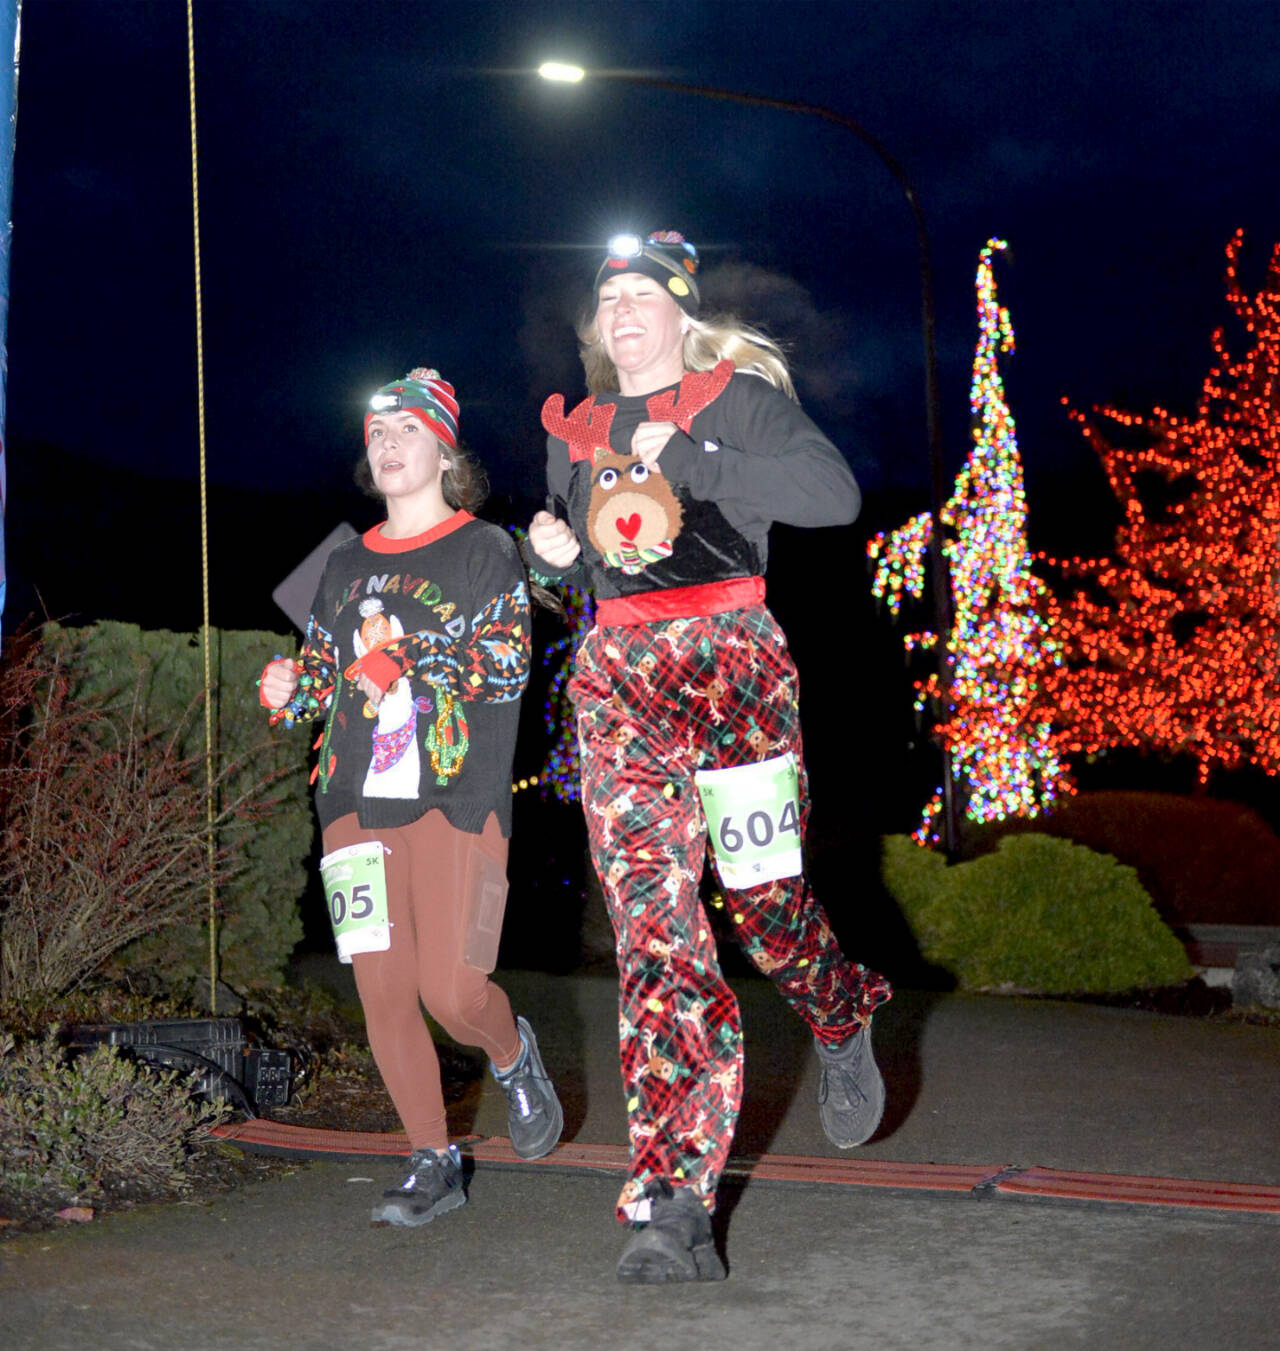 Sami Nolan, left, and Chelsea Pluard, both of Port Angeles, finish the 5K in the 2022 edition of the Jamestown S’Klallam Glow Run in Blyn. The race returns Saturday afternoon and evening. (Run the Peninsula)